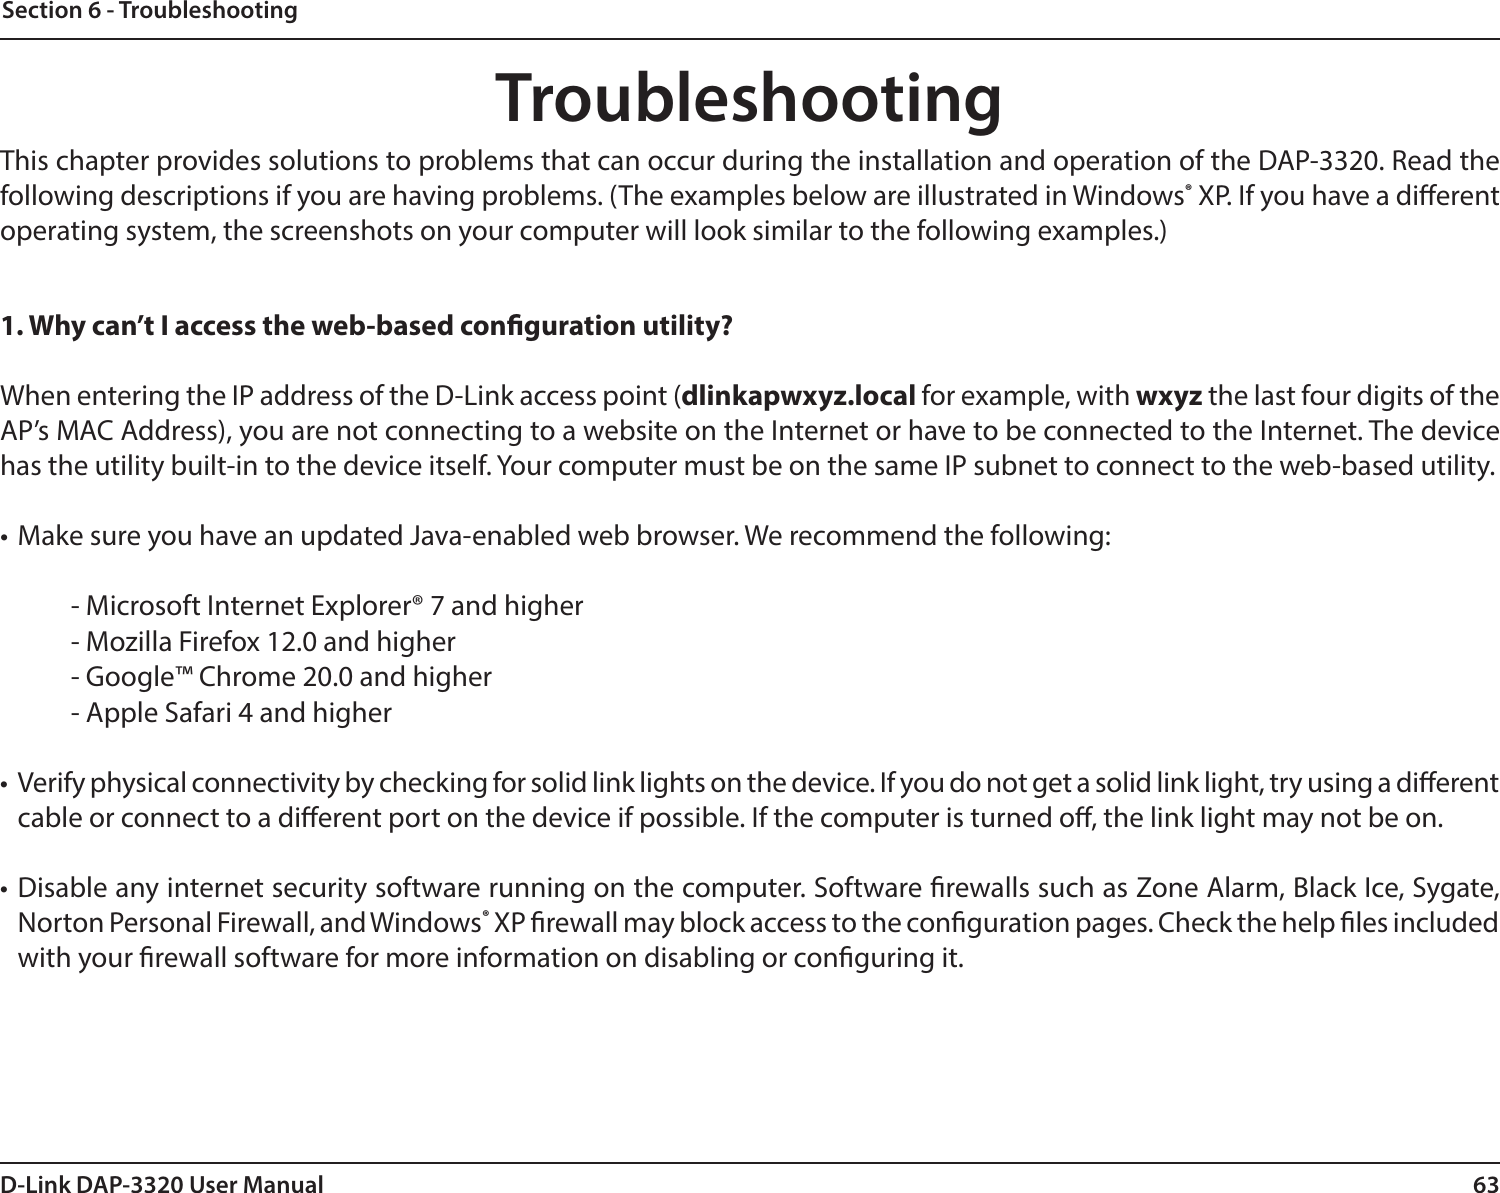 63D-Link DAP-3320 User ManualSection 6 - TroubleshootingTroubleshootingThis chapter provides solutions to problems that can occur during the installation and operation of the DAP-3320. Read the following descriptions if you are having problems. (The examples below are illustrated in Windows® XP. If you have a dierent operating system, the screenshots on your computer will look similar to the following examples.)1. Why can’t I access the web-based conguration utility?When entering the IP address of the D-Link access point (dlinkapwxyz.local for example, with wxyz the last four digits of the AP’s MAC Address), you are not connecting to a website on the Internet or have to be connected to the Internet. The device has the utility built-in to the device itself. Your computer must be on the same IP subnet to connect to the web-based utility. • Make sure you have an updated Java-enabled web browser. We recommend the following: - Microsoft Internet Explorer® 7 and higher- Mozilla Firefox 12.0 and higher- Google™ Chrome 20.0 and higher- Apple Safari 4 and higher•  Verify physical connectivity by checking for solid link lights on the device. If you do not get a solid link light, try using a dierent cable or connect to a dierent port on the device if possible. If the computer is turned o, the link light may not be on.• Disable any internet security software running on the computer. Software rewalls such as Zone Alarm, Black Ice, Sygate, Norton Personal Firewall, and Windows® XP rewall may block access to the conguration pages. Check the help les included with your rewall software for more information on disabling or conguring it.